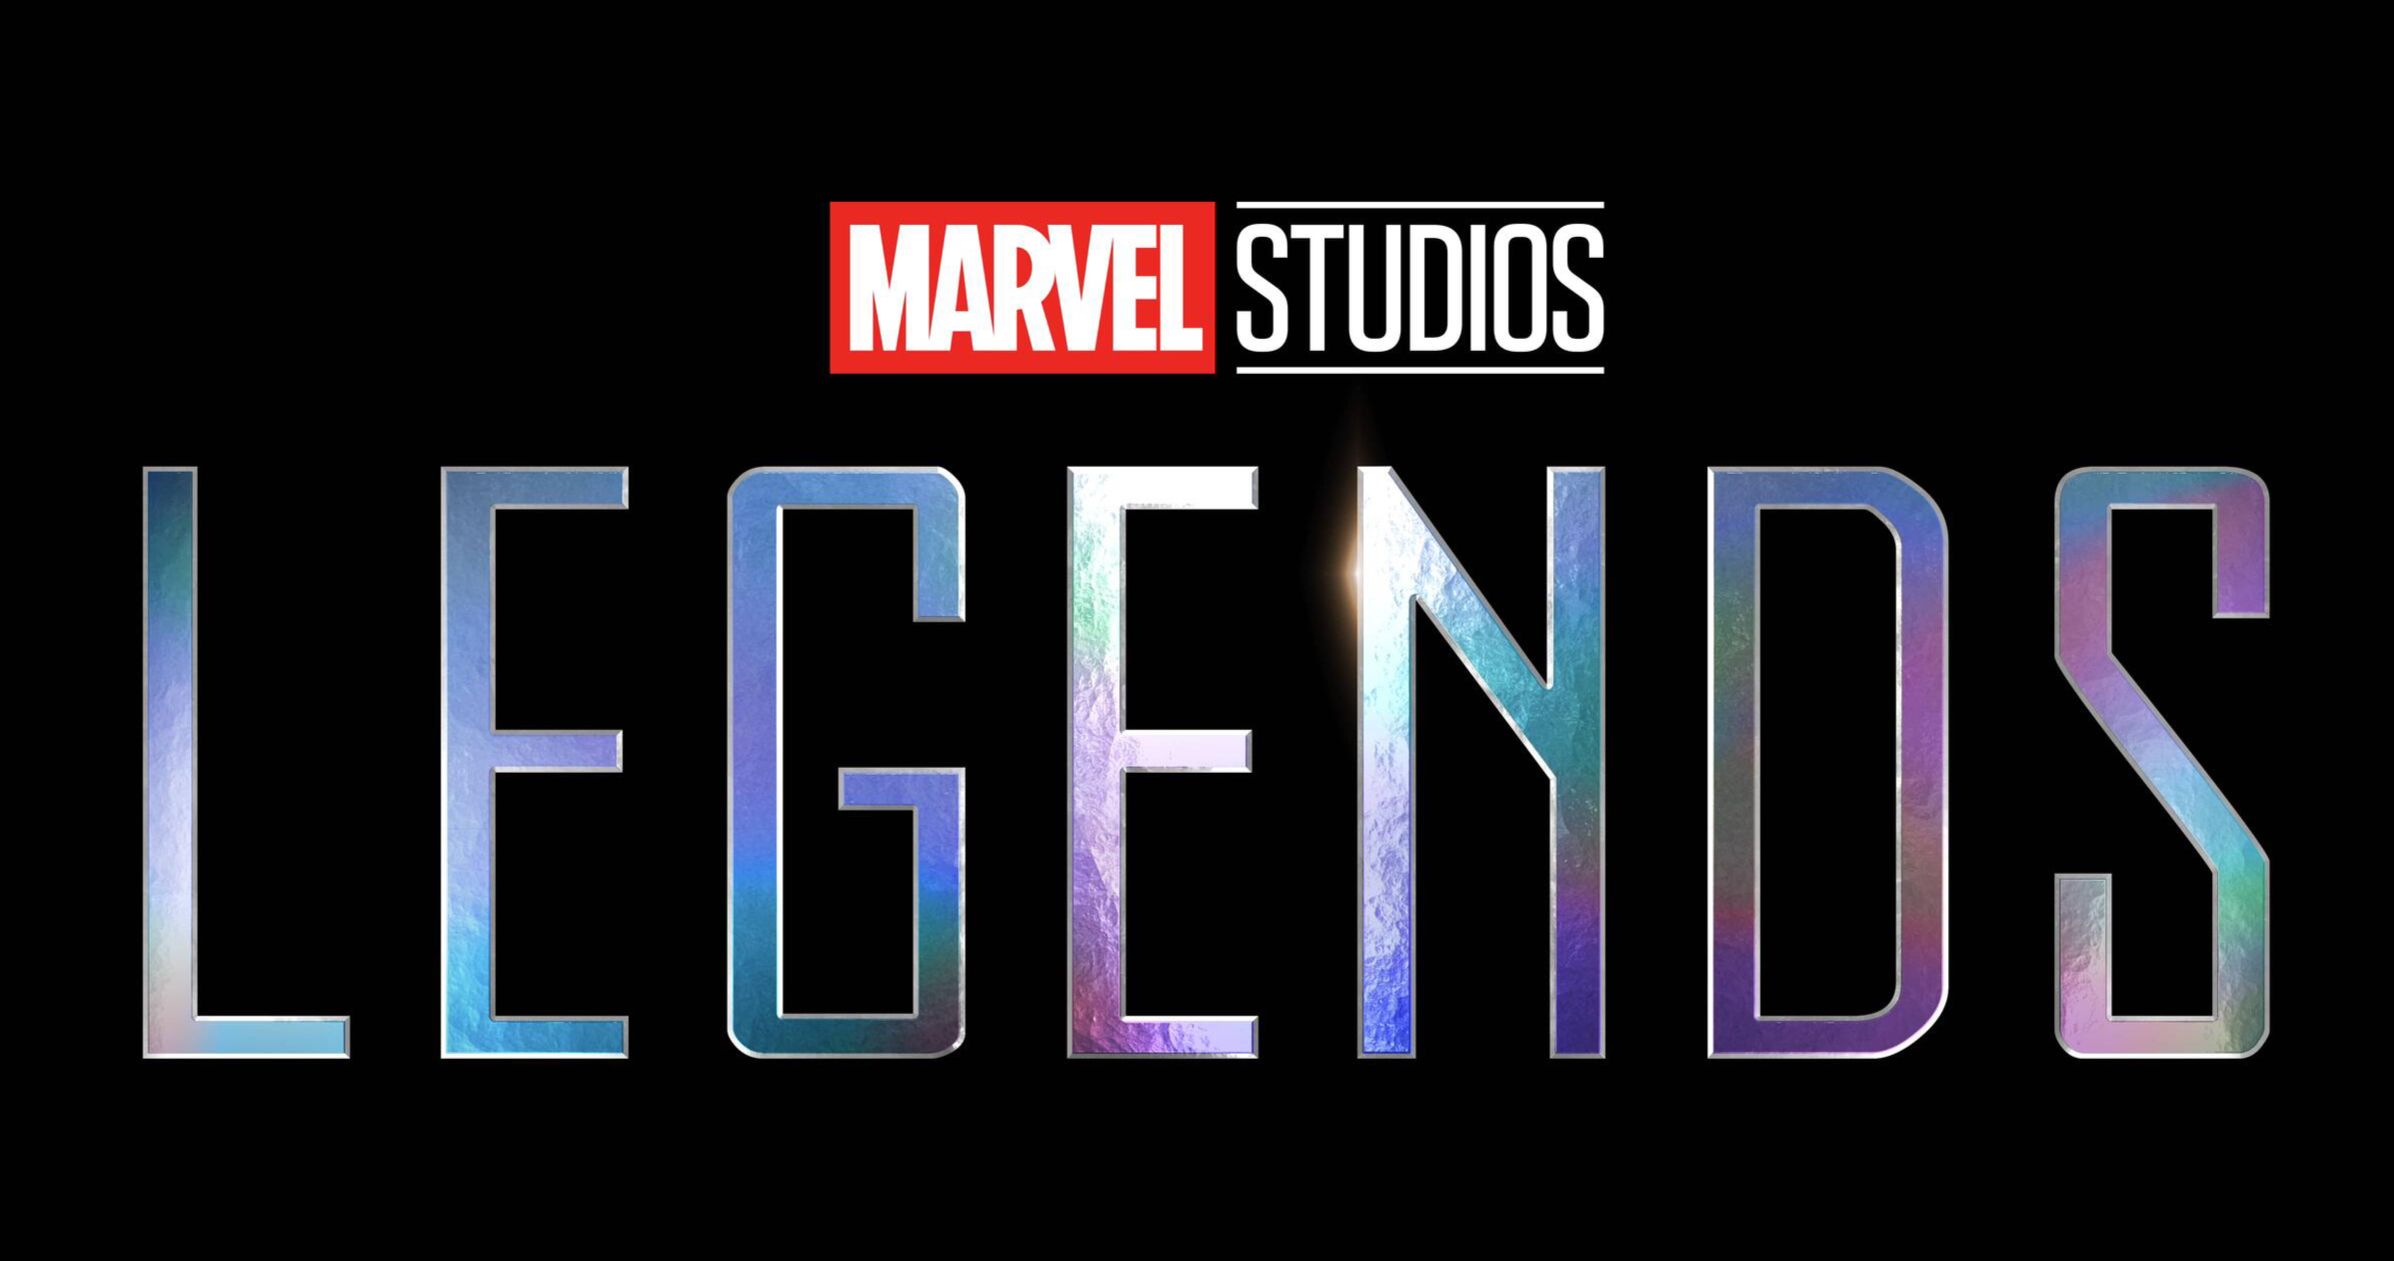 Marvel Studios: Legends TV Show Explores Iconic MCU Characters on Disney+ This January